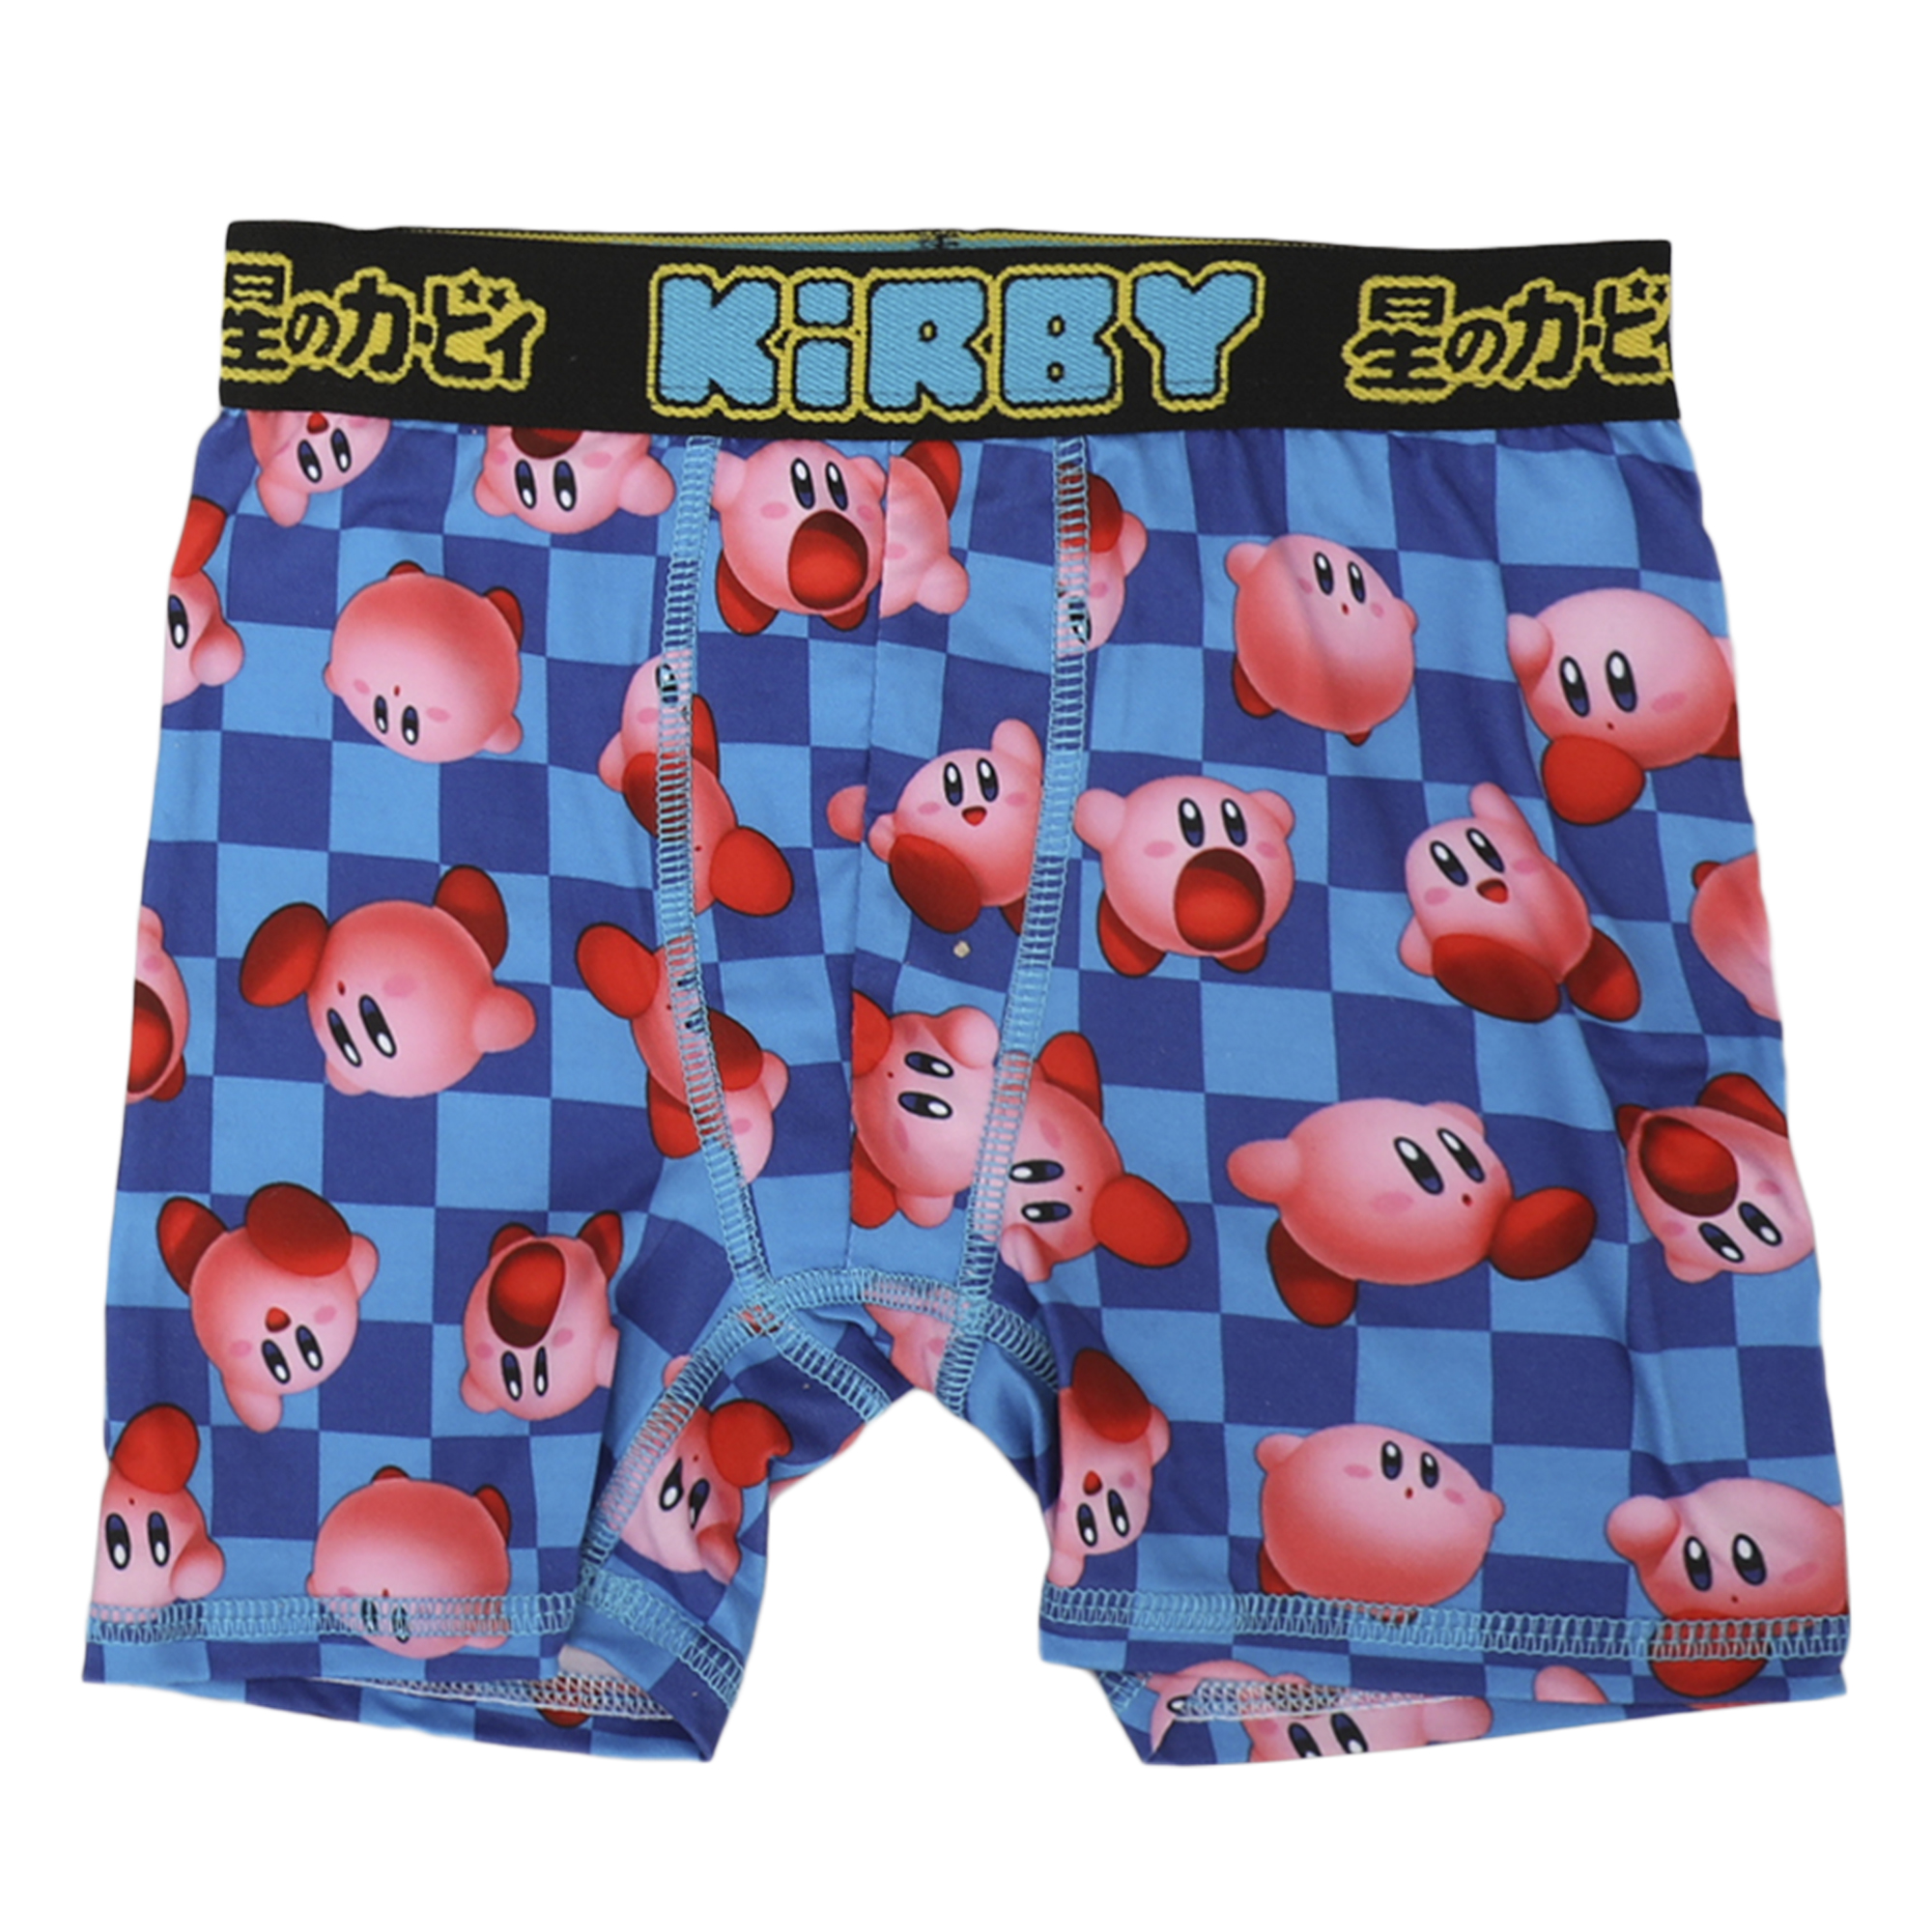 Kirby Characters & Power Ups 4-Pack Boy's Boxer Briefs-4 - image 3 of 5